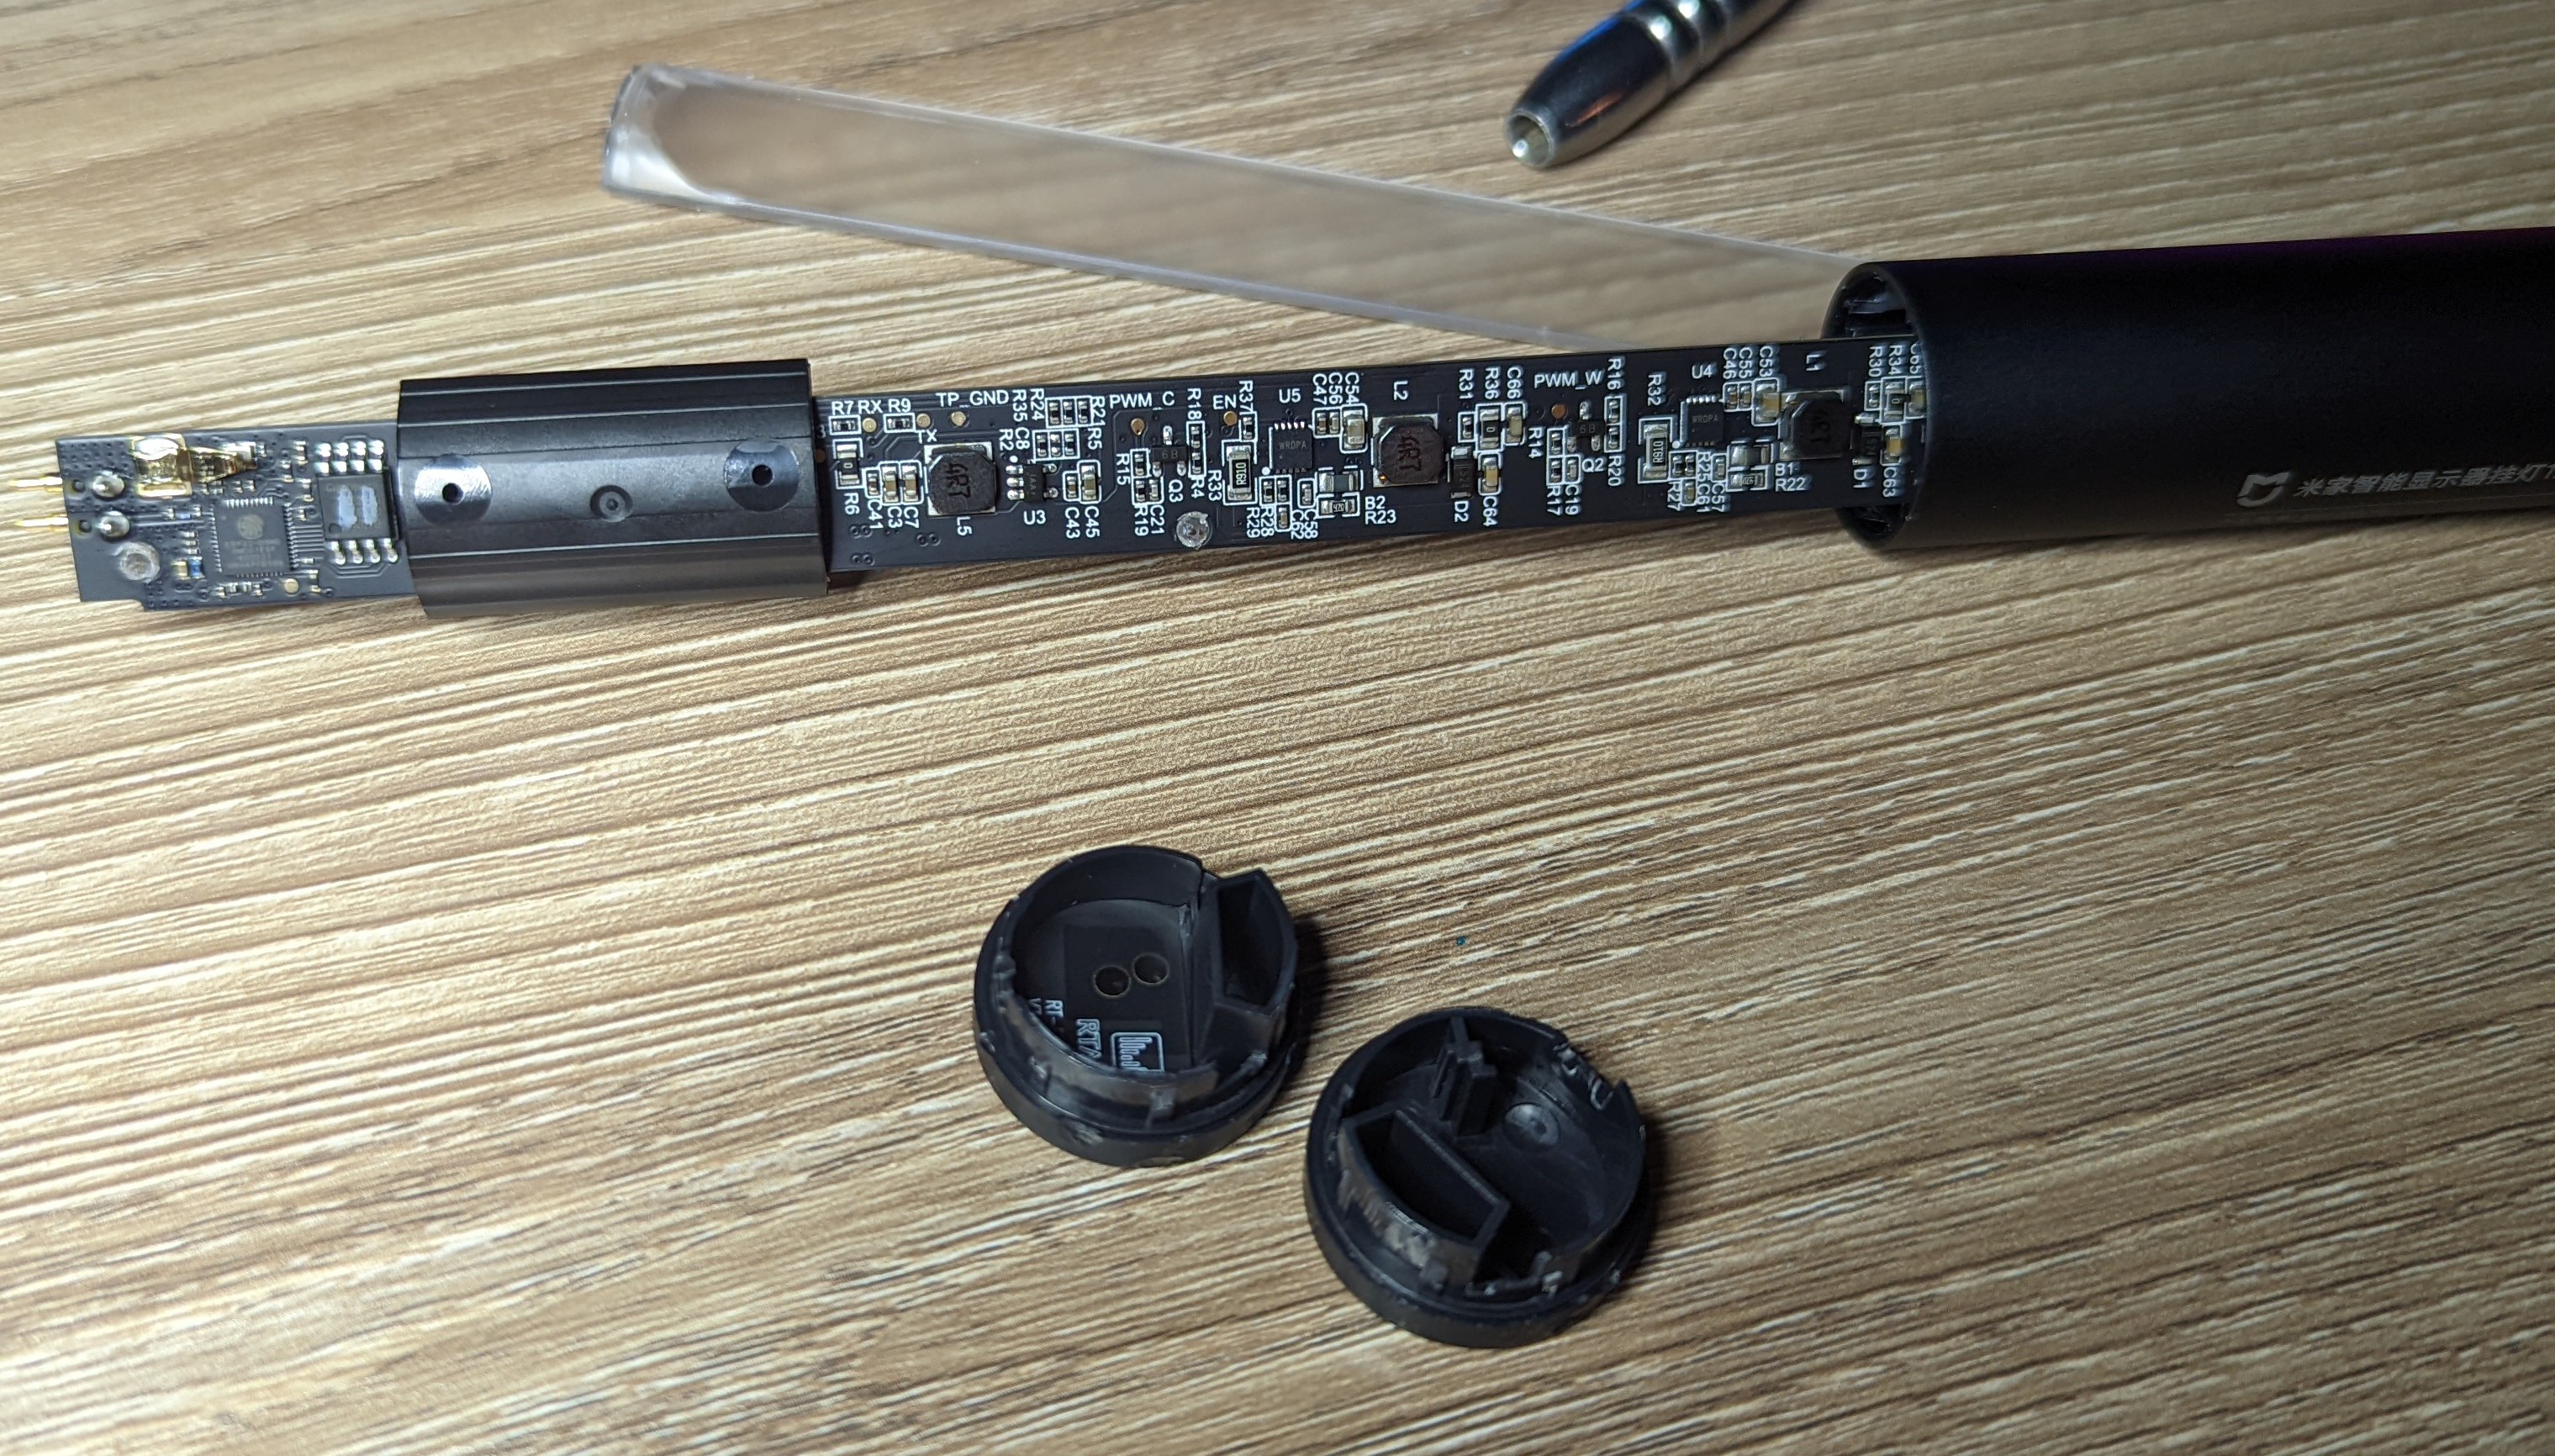 Photo showing a few of the lamp components removed and the primary PCB partially removed from the lamp body.